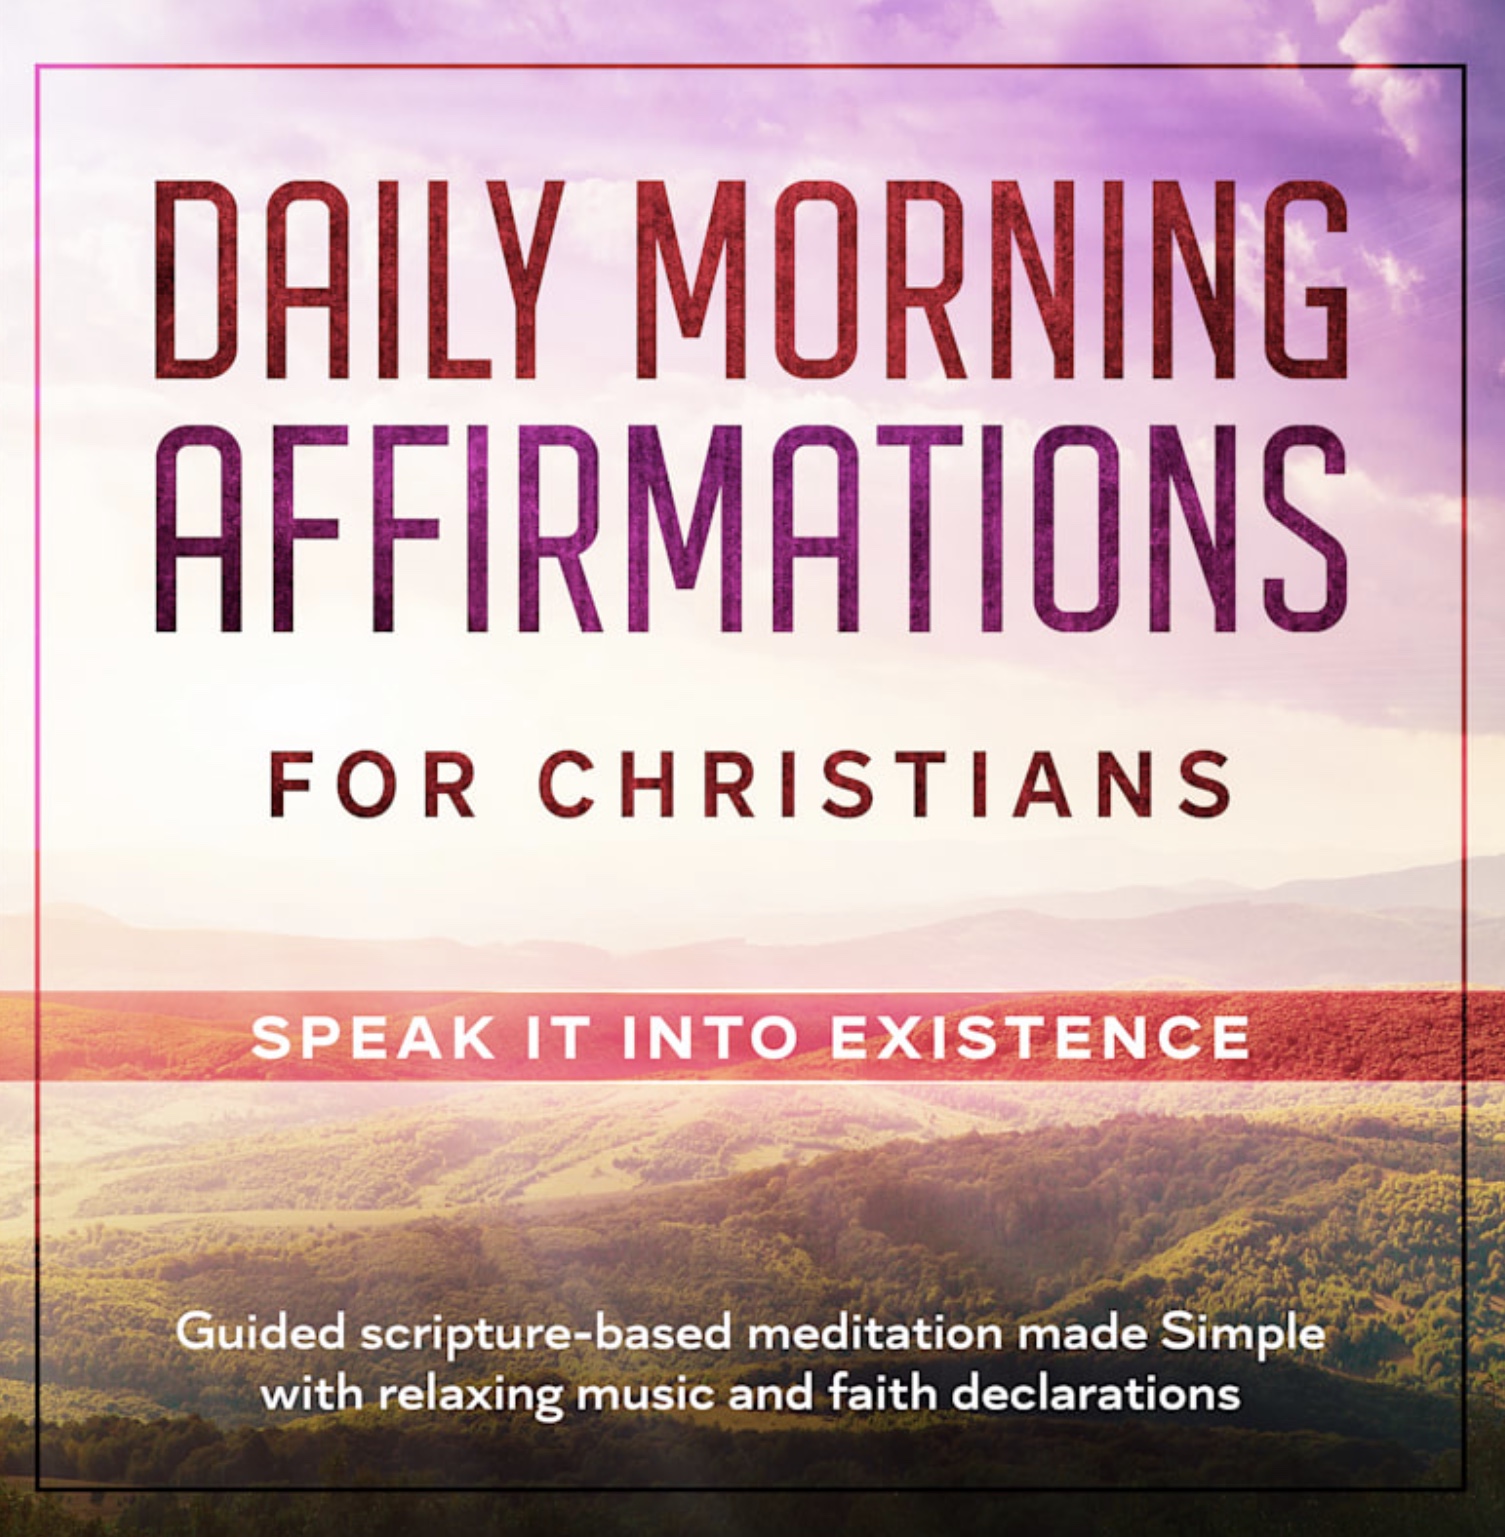 Start your day with these affirmations - Speak your new life into